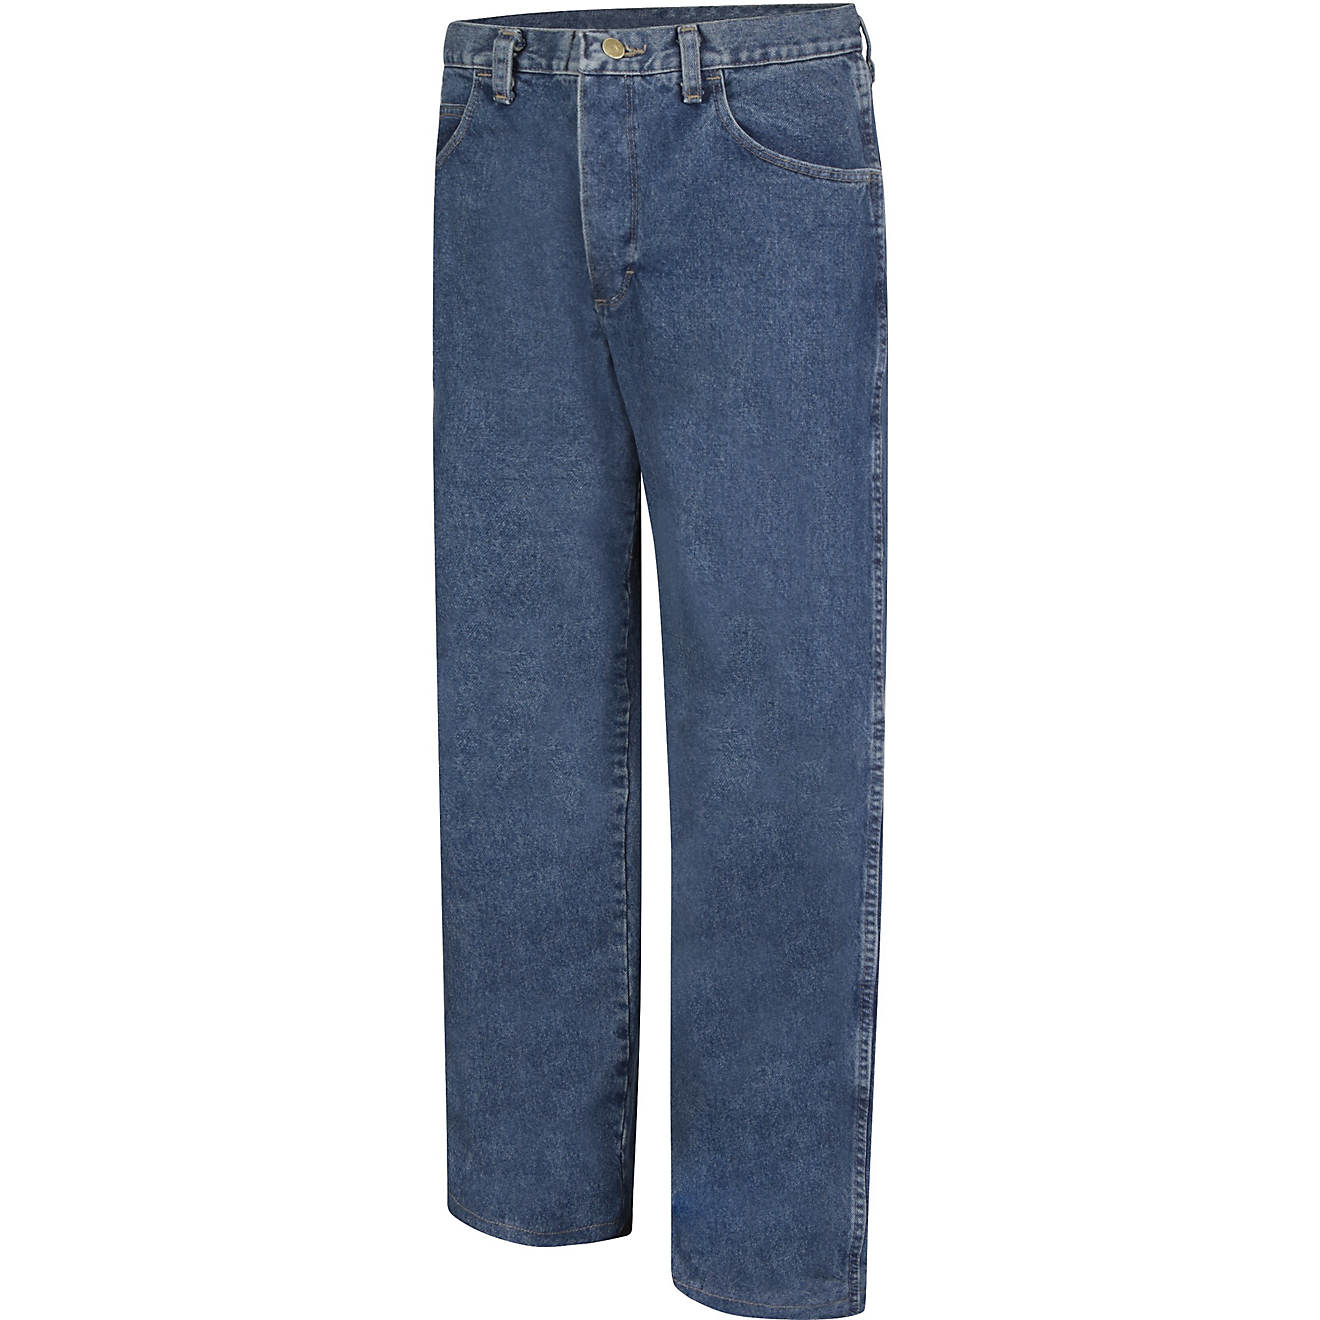 Bulwark Men's FR Stonewashed Jeans | Free Shipping at Academy